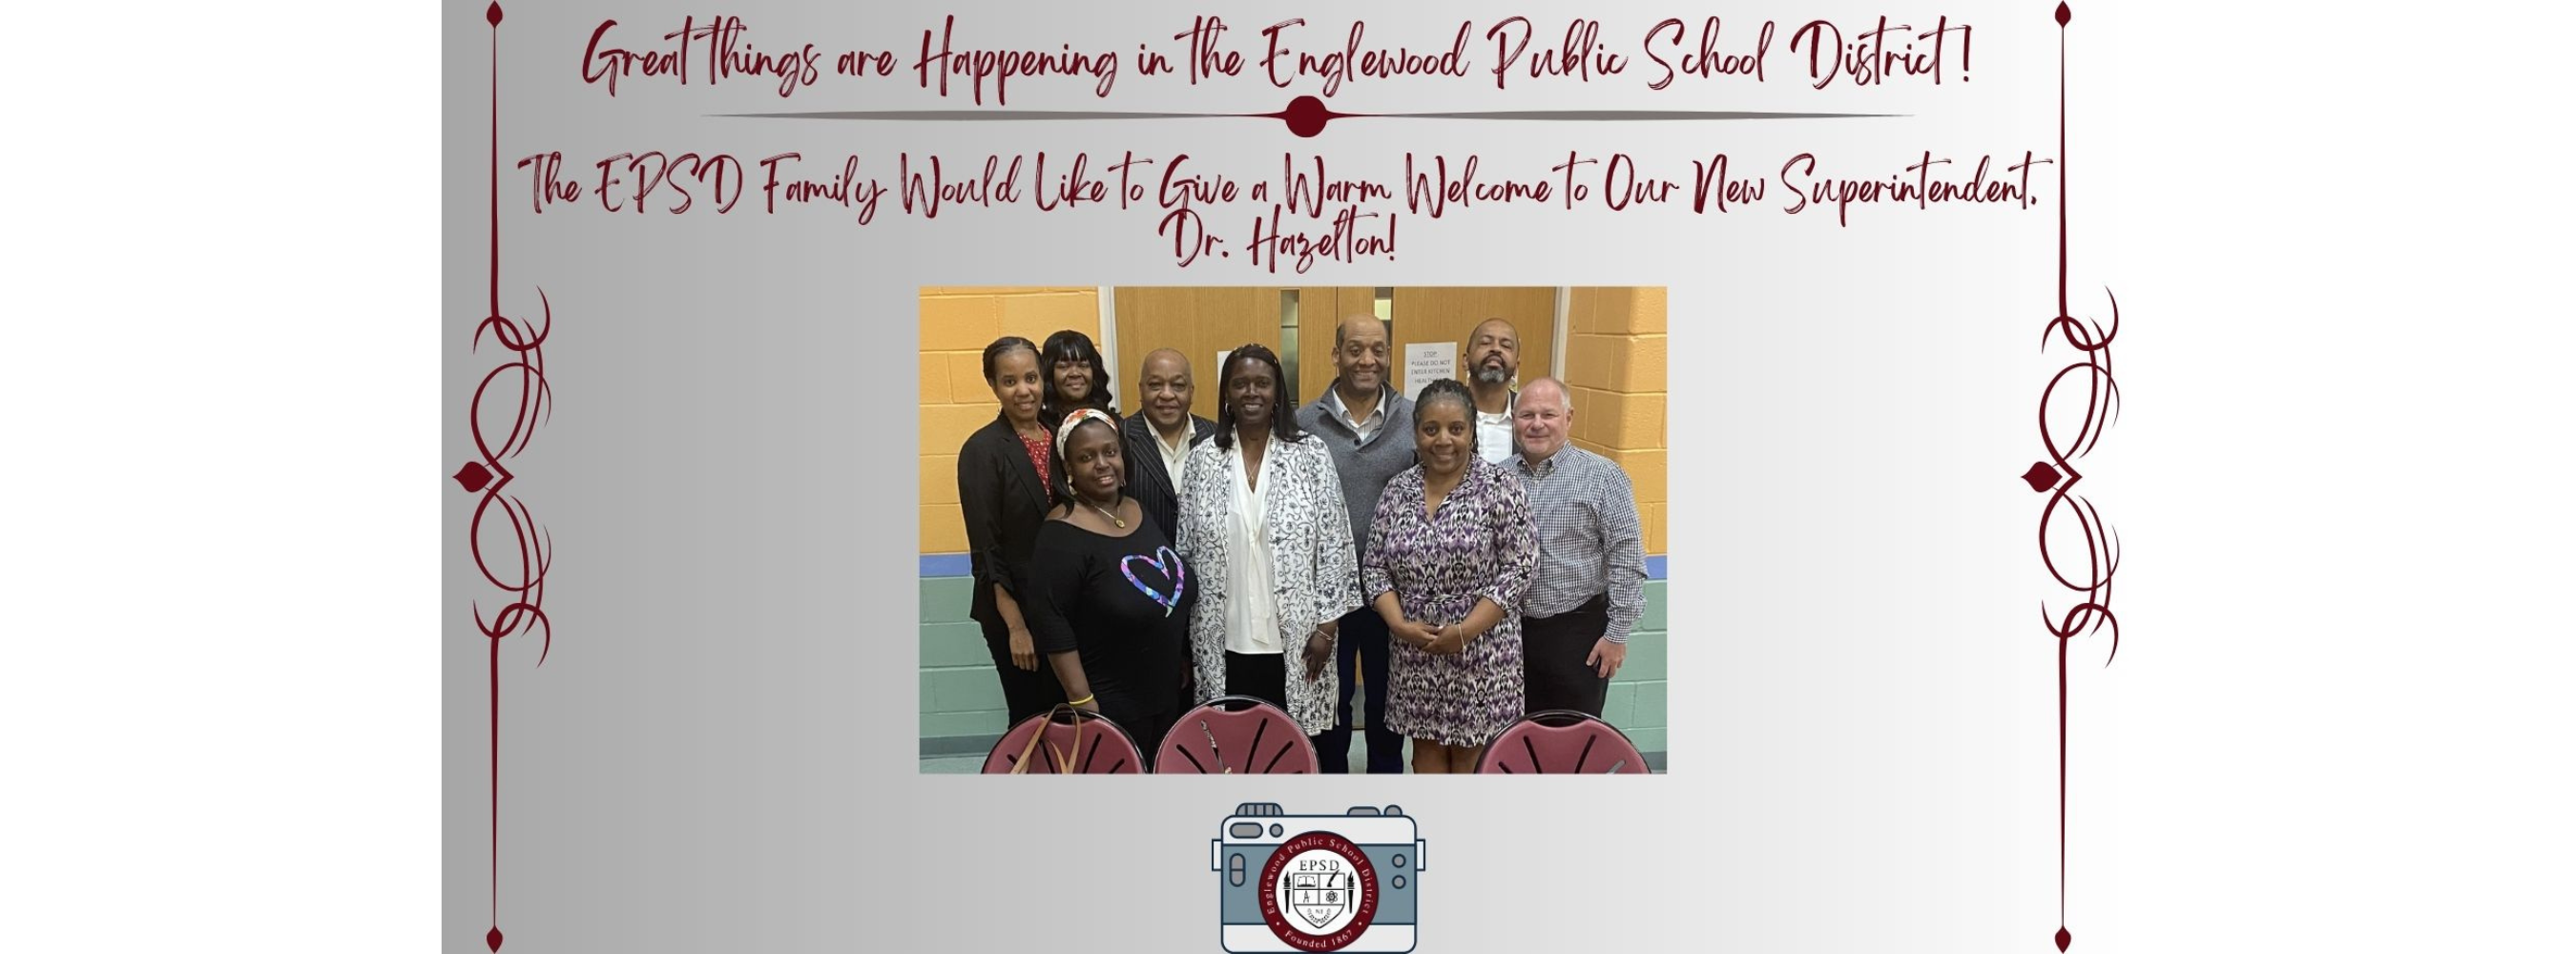 Great things are happening in the Englewood Public School District! The EPSD family would like to give a warm welcome to our new Superintendent, Dr Hazelton!